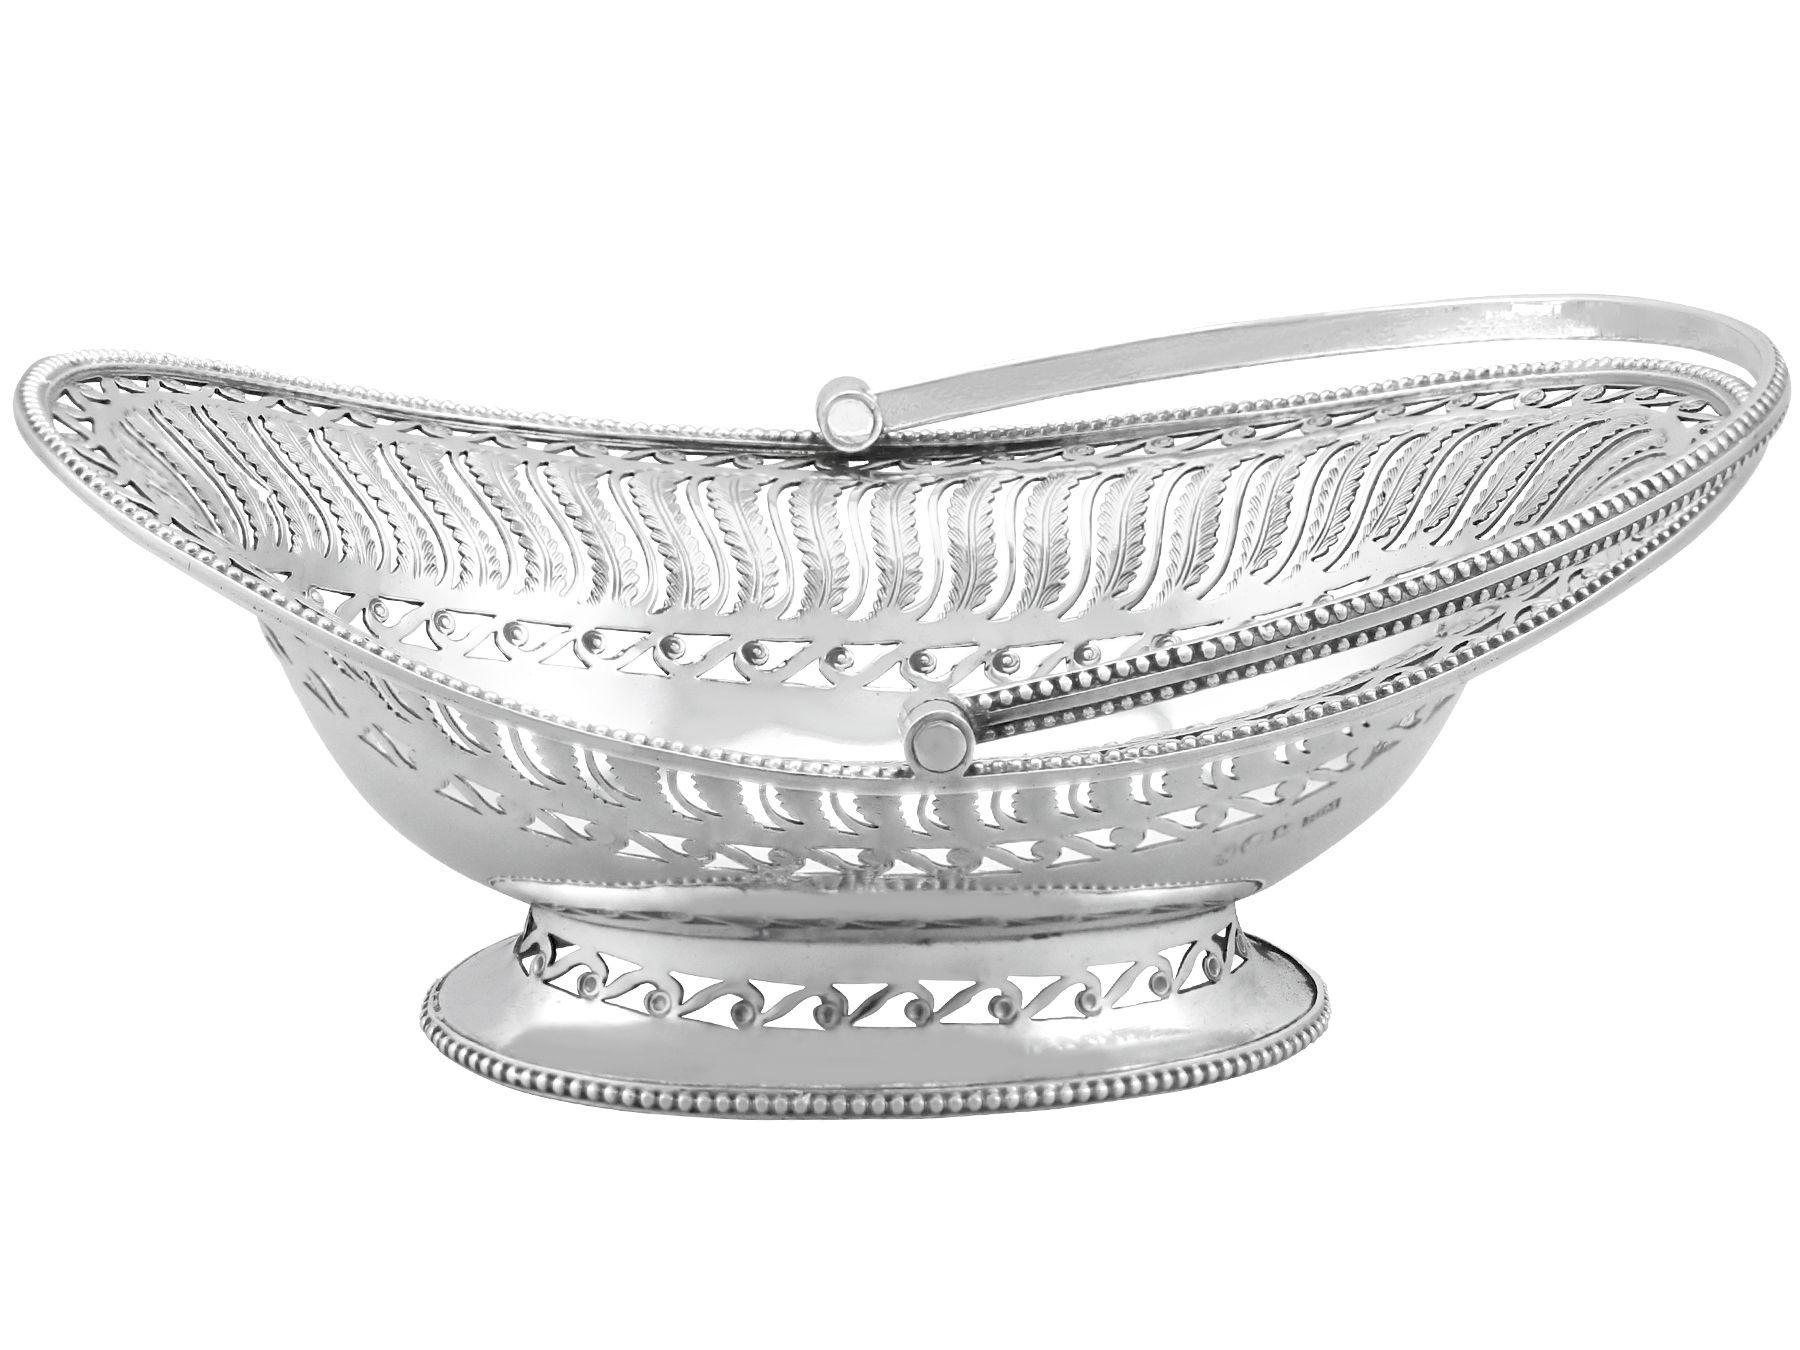 Antique Sterling Silver Bon Bon Basket In Excellent Condition For Sale In Jesmond, Newcastle Upon Tyne